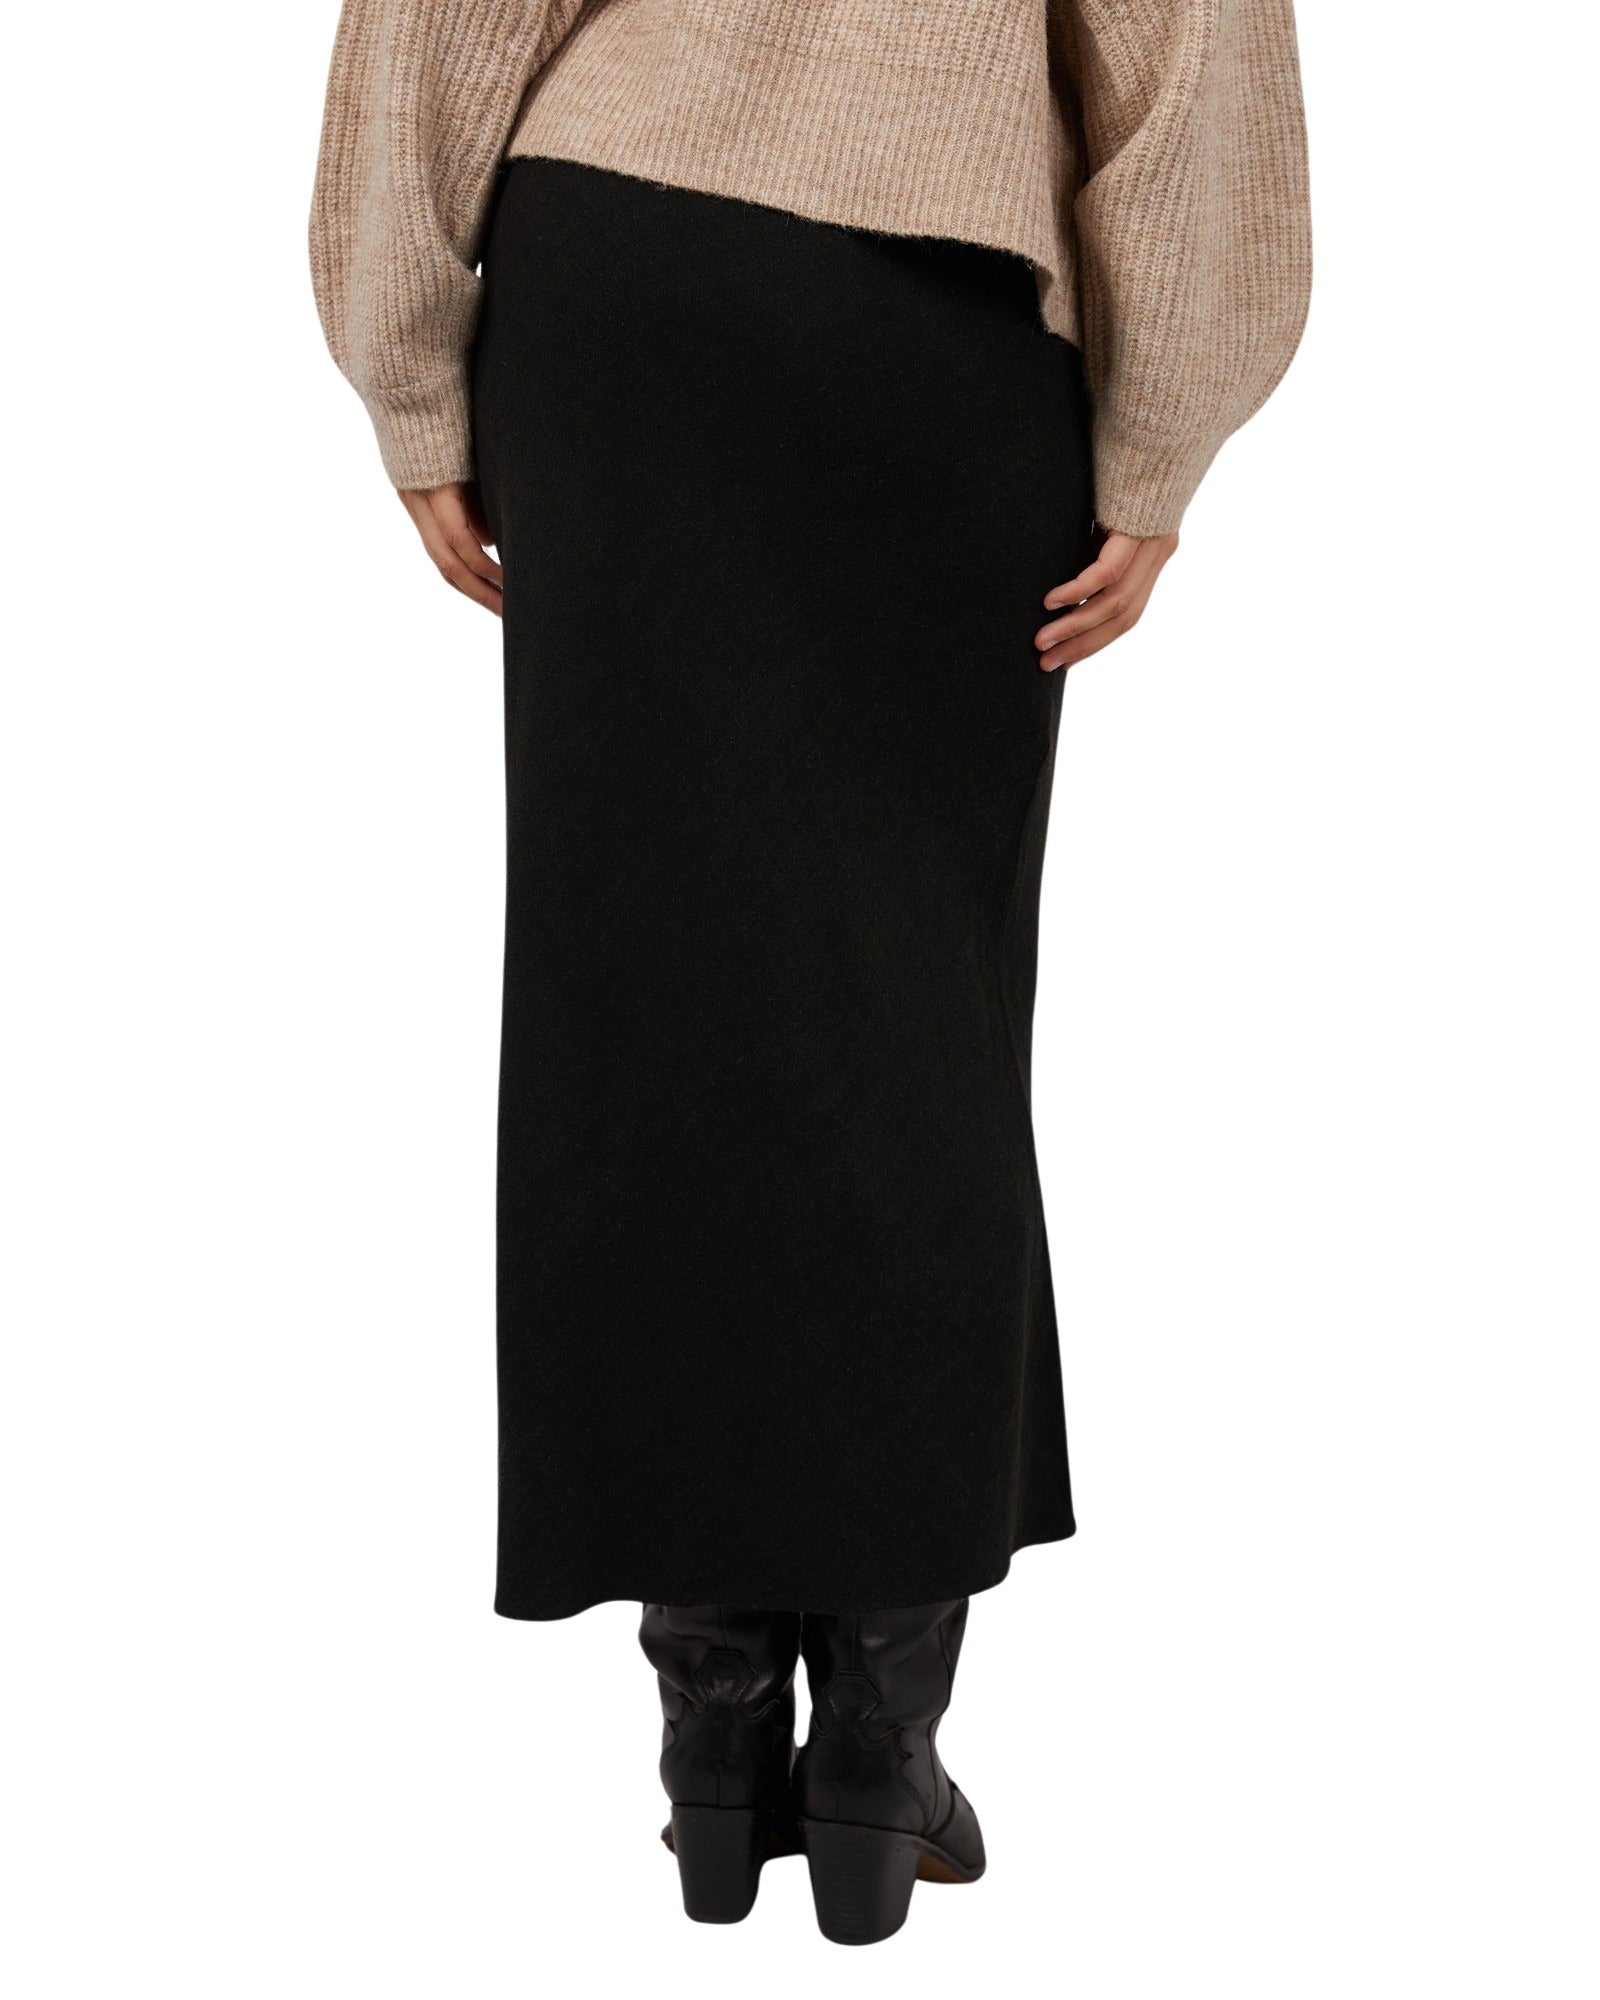 All About Eve - Leyla Maxi Skirt - Black